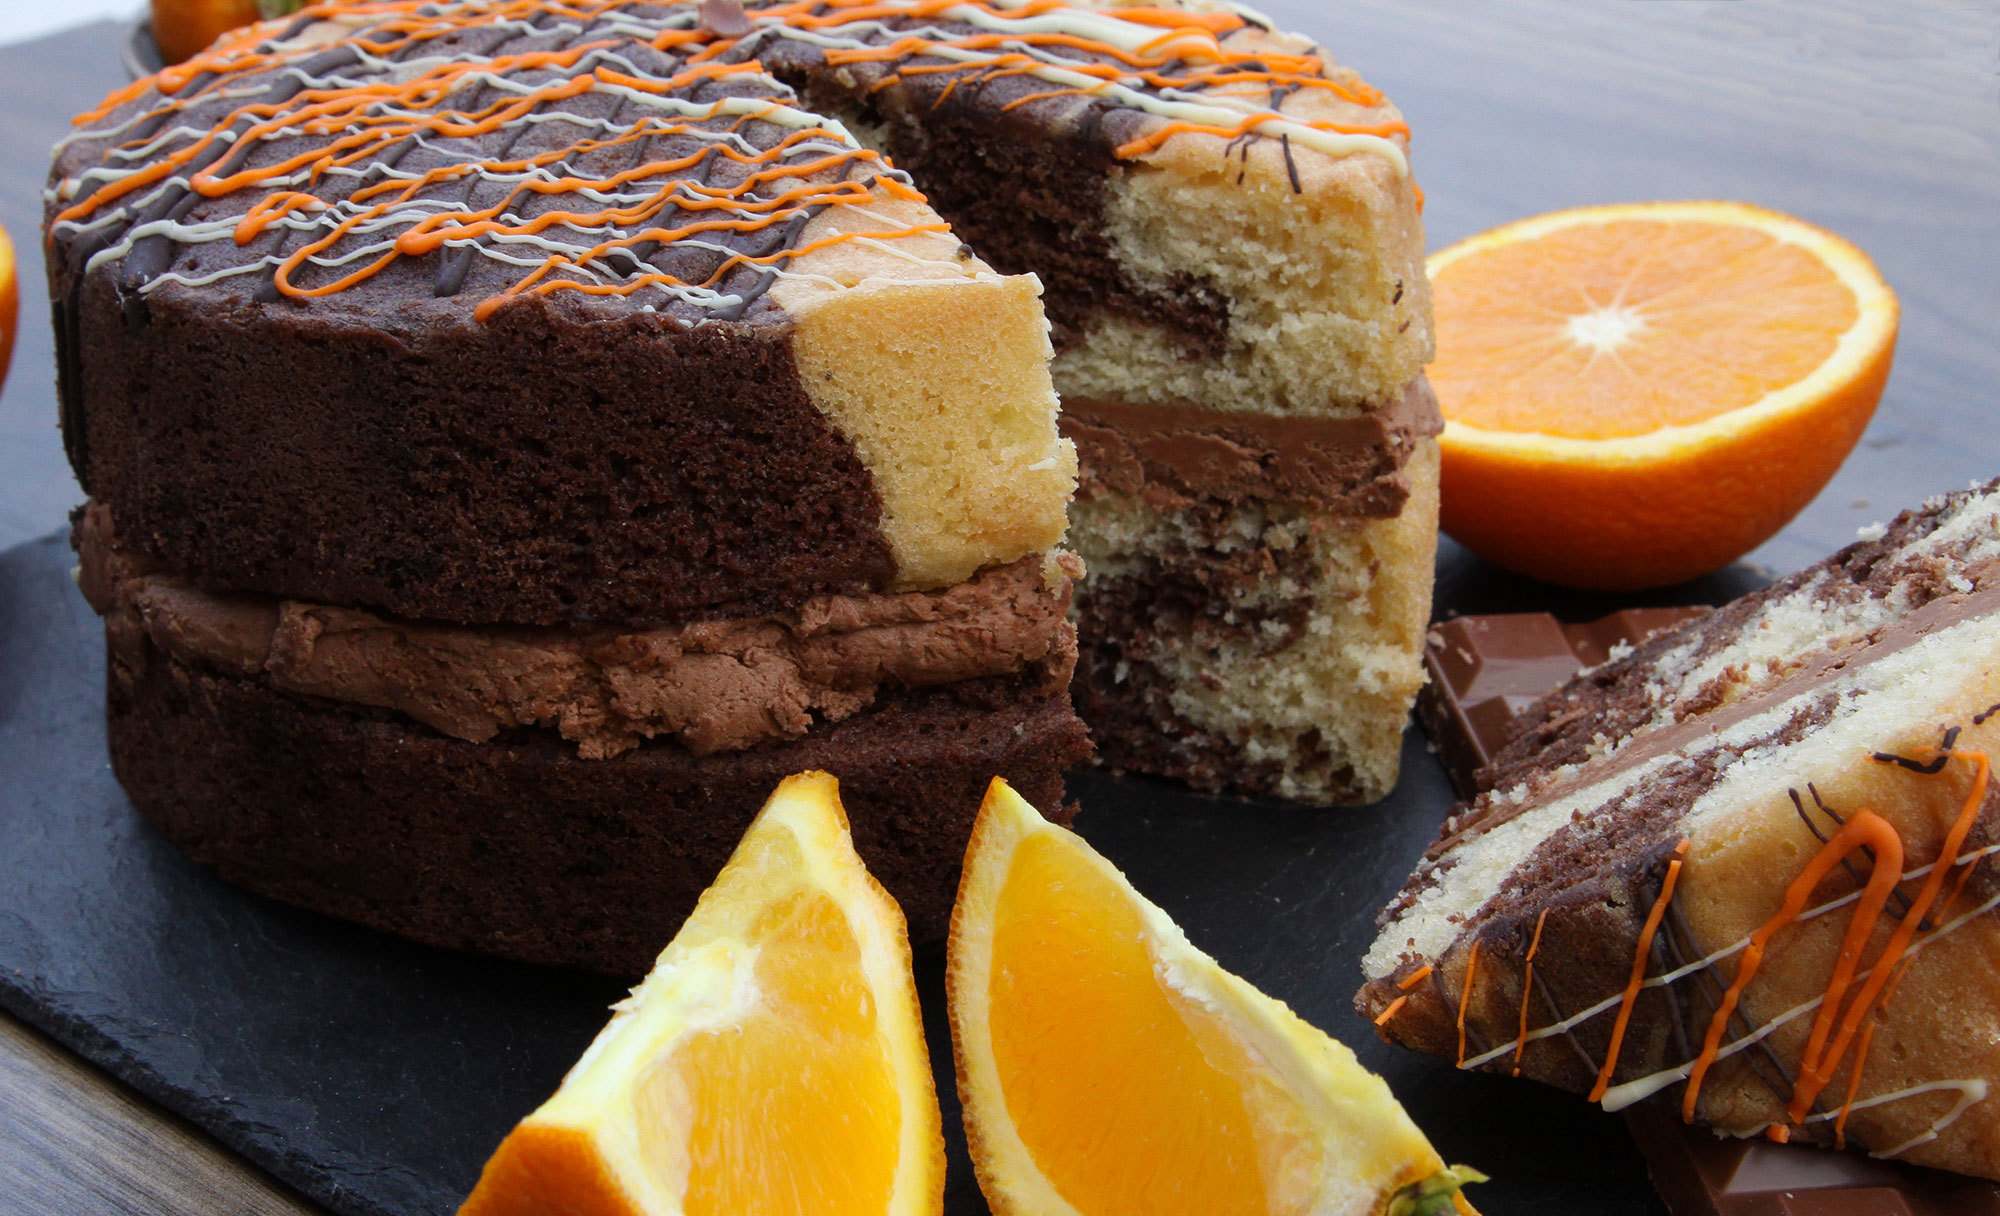 Celebrate the weekend with a SPONGE Friday! Order by Thursday 2pm for delivery on Friday! £9.99 for Chocolate & Orange Sponge Friday!